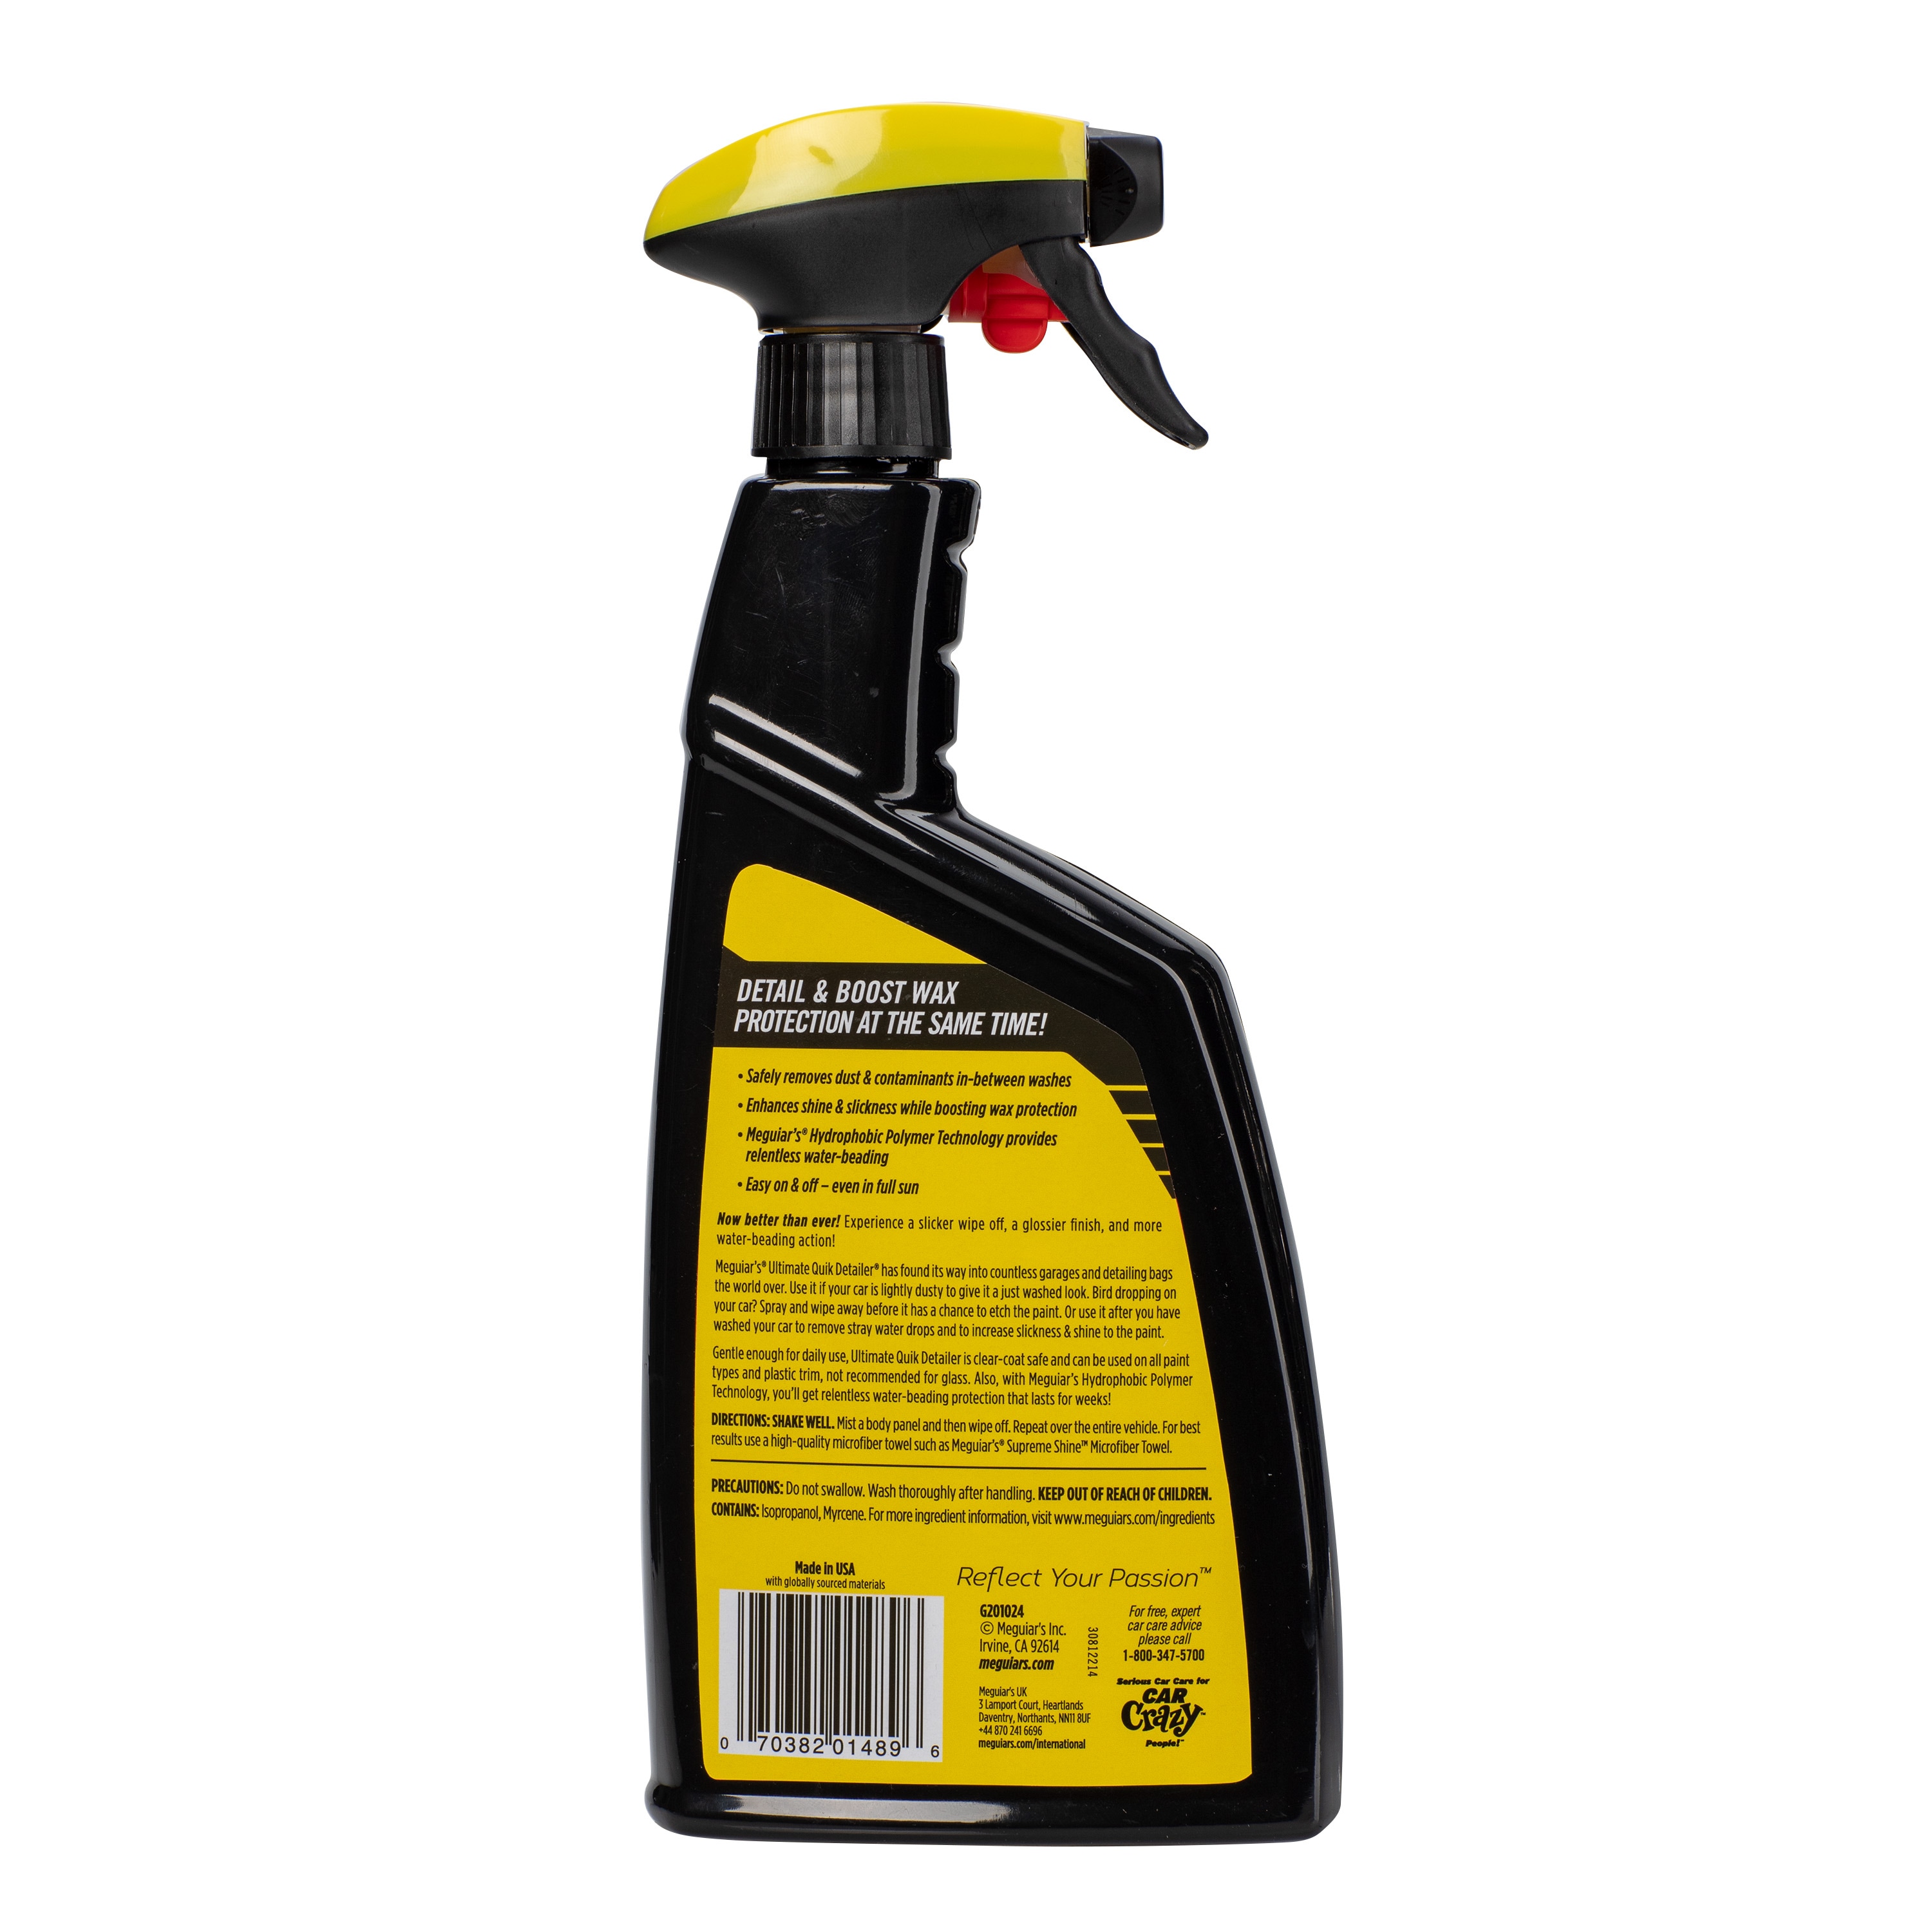 ULTRA CLEAN TIRE WET #1026 – Auto Detail Supply Pros